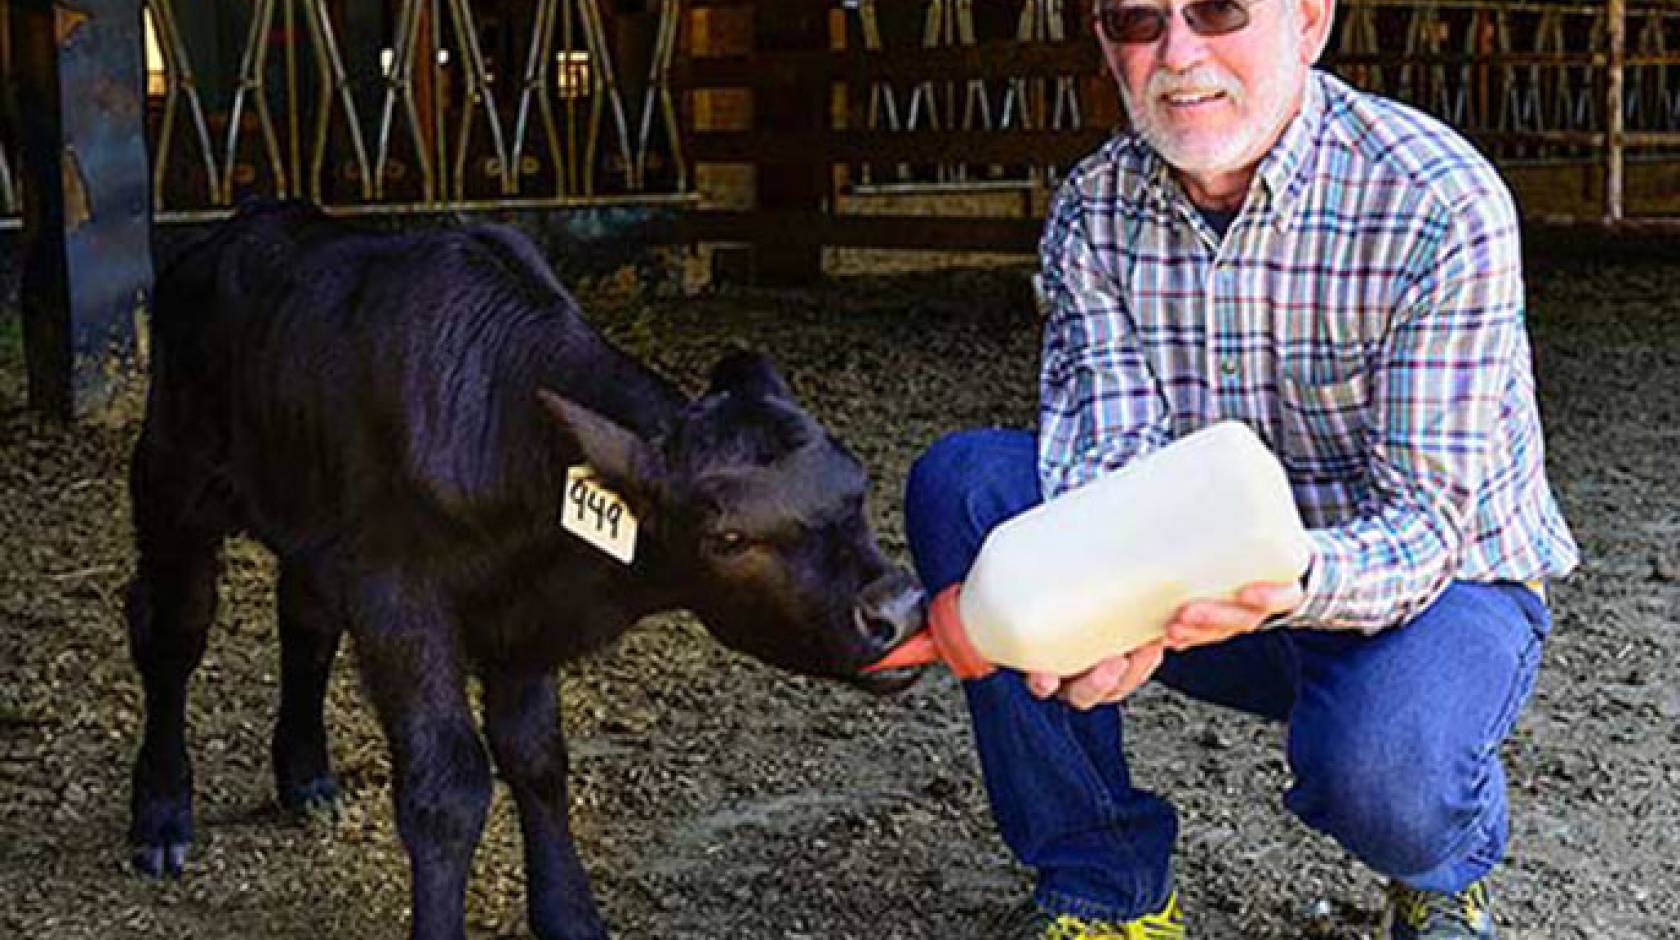 A new vaccine developed by veterinary immunologist Jeff Stott shows promise for preventing foothill abortion disease, which kills calves before or at birth.